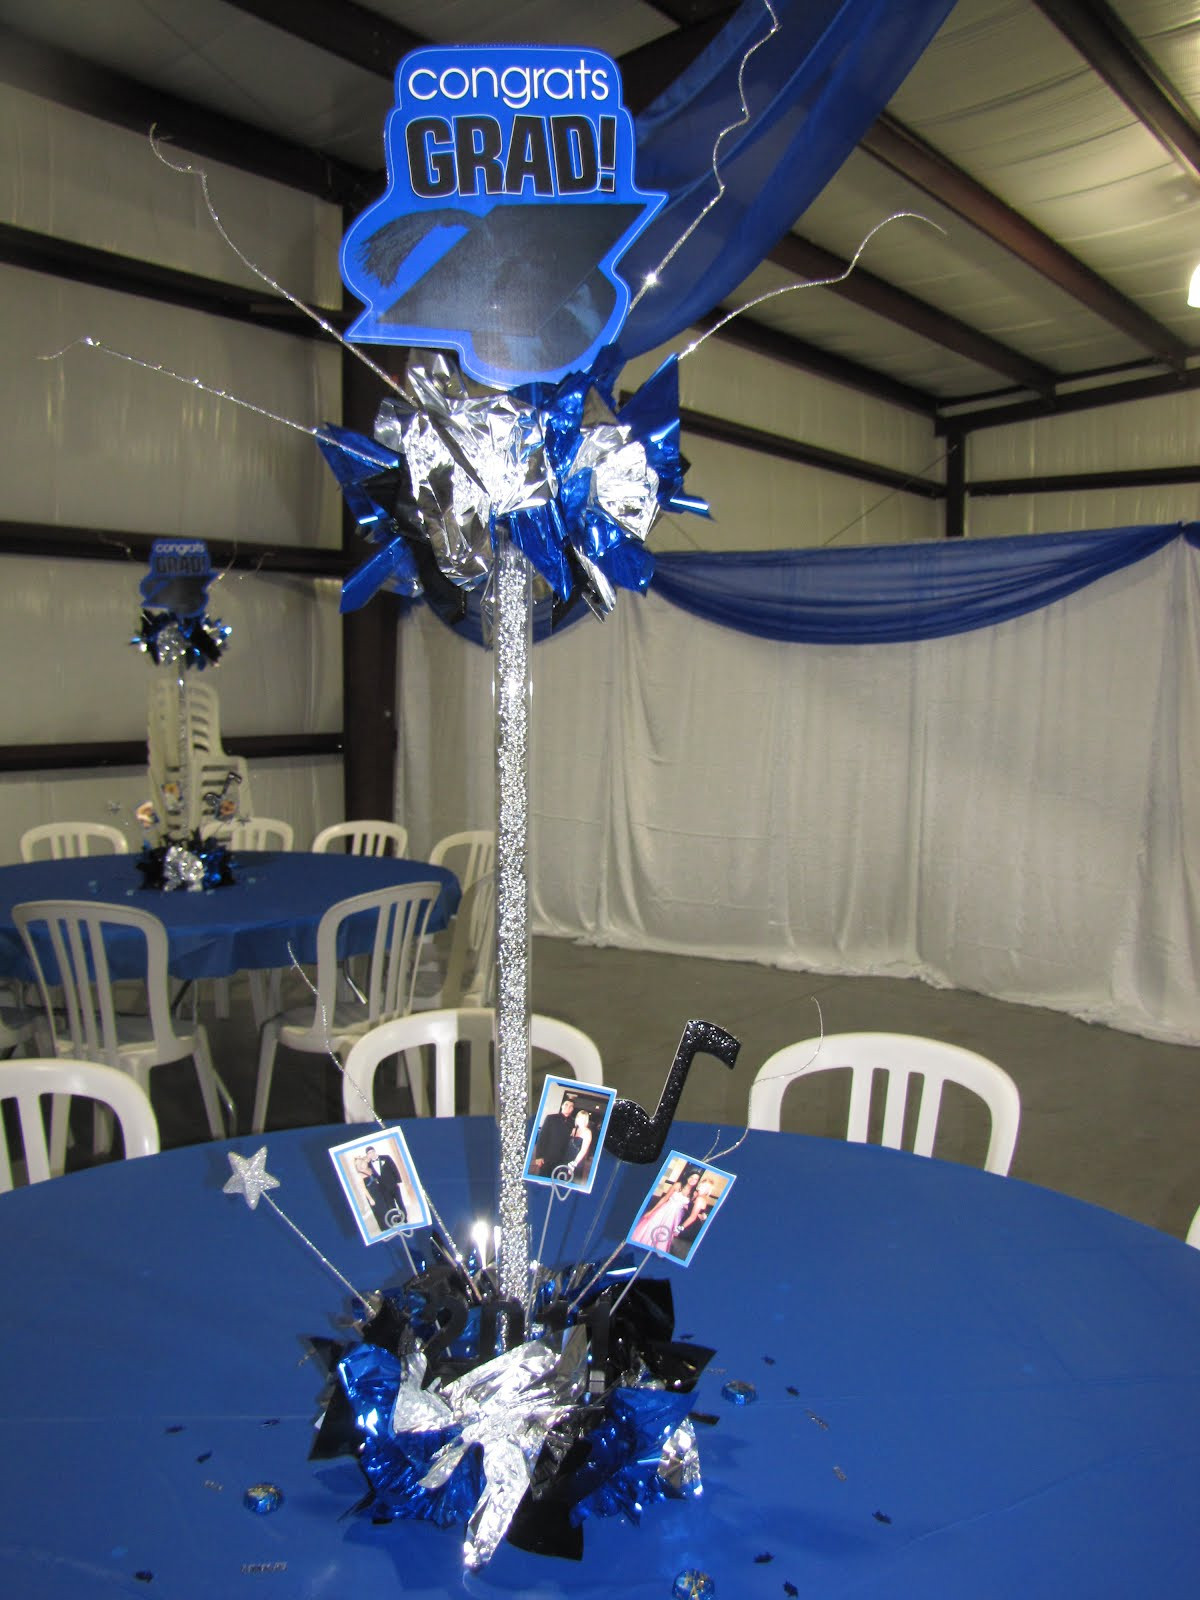 Red White And Blue Graduation Party Ideas
 Party People Event Decorating pany Graduation Decor